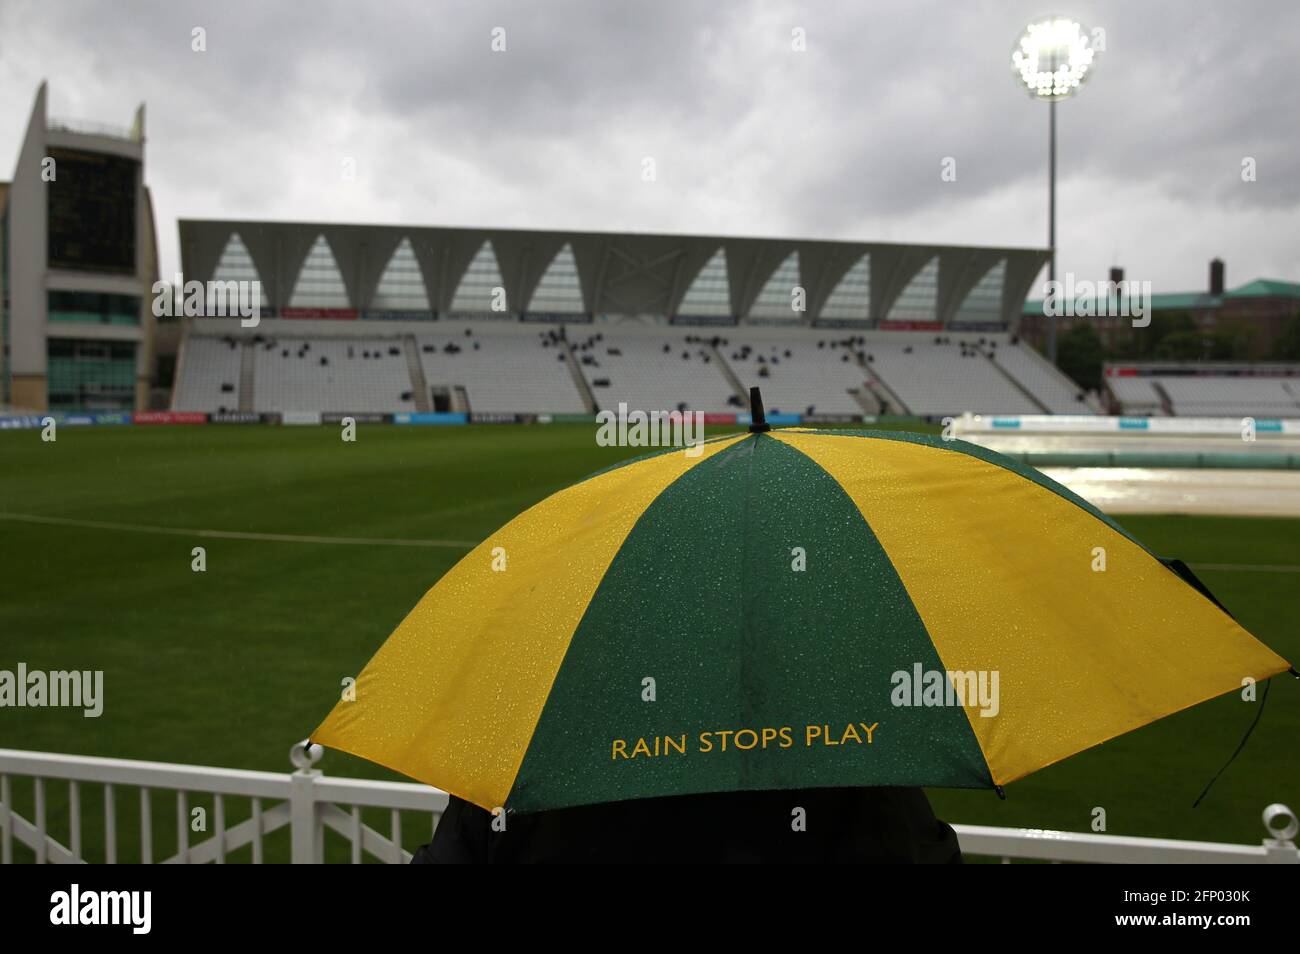 A spectator shelters under a Nottinghamshire branded umbrella as rain stops play during day one of the LV= Insurance County Championship match at Trent Bridge, Nottingham. Picture date: Thursday May 20, 2021. Stock Photo